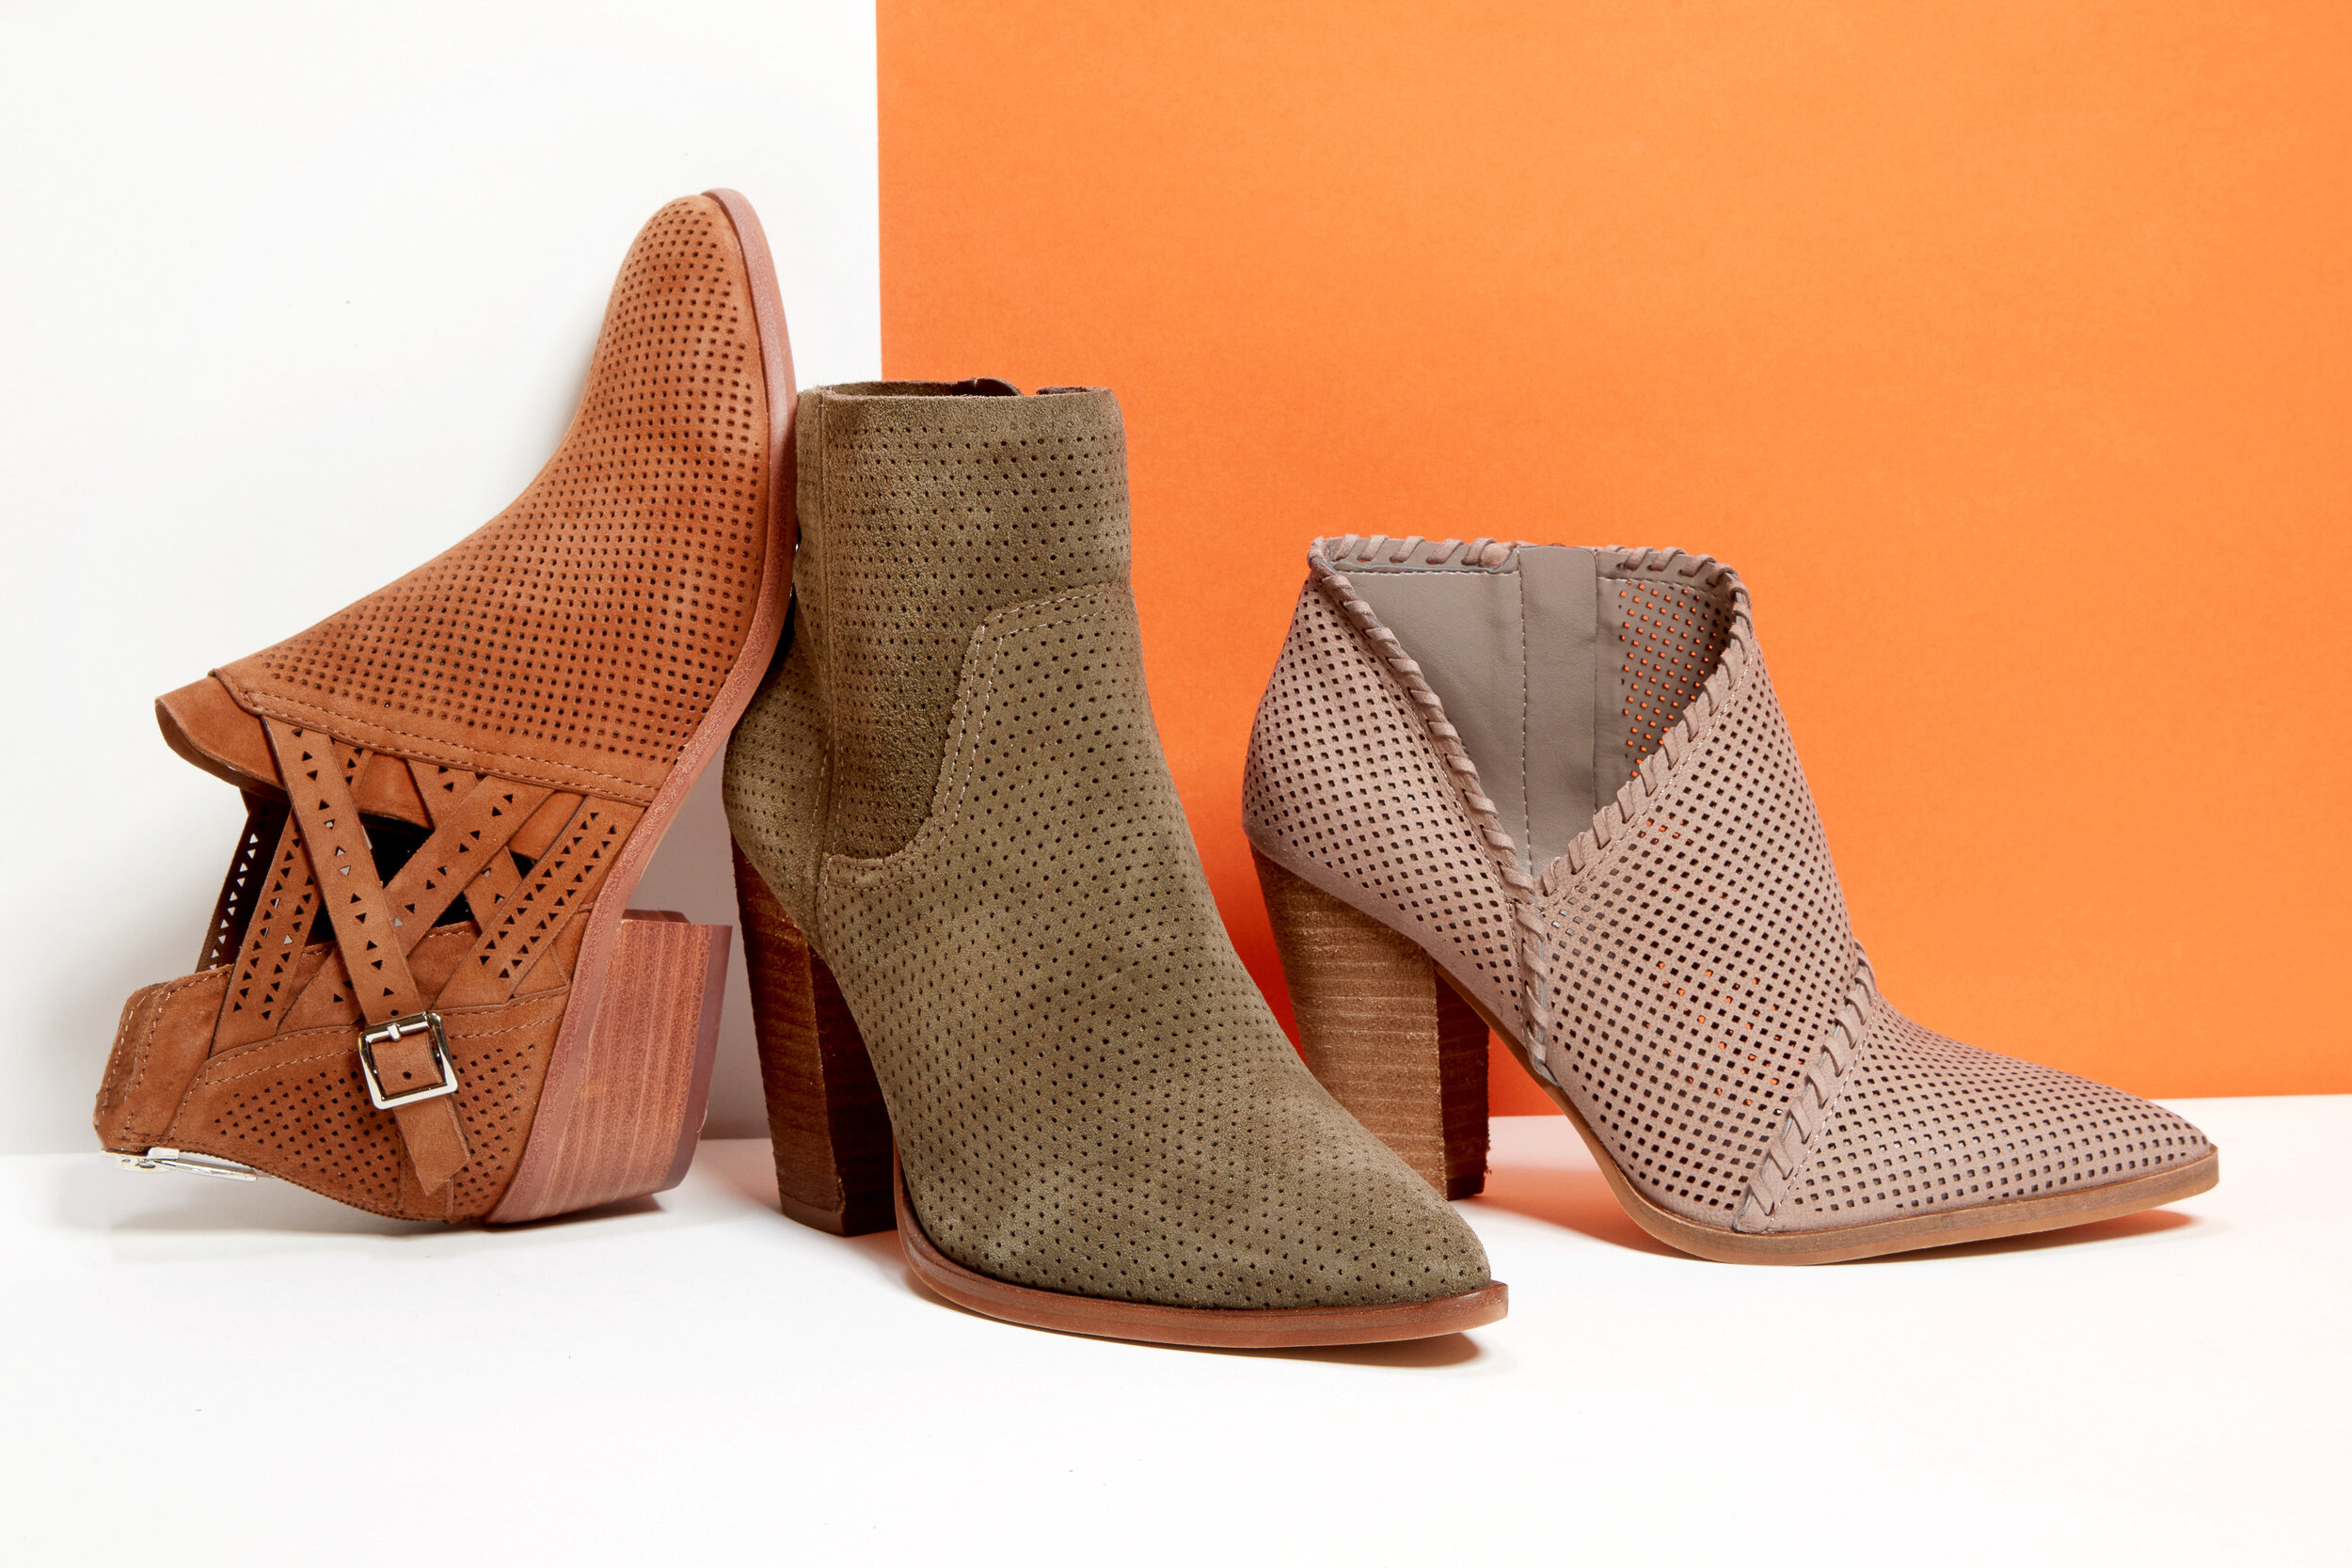 VINCE CAMUTO SHOES UP TO 50% OFF 334412-029.jpg